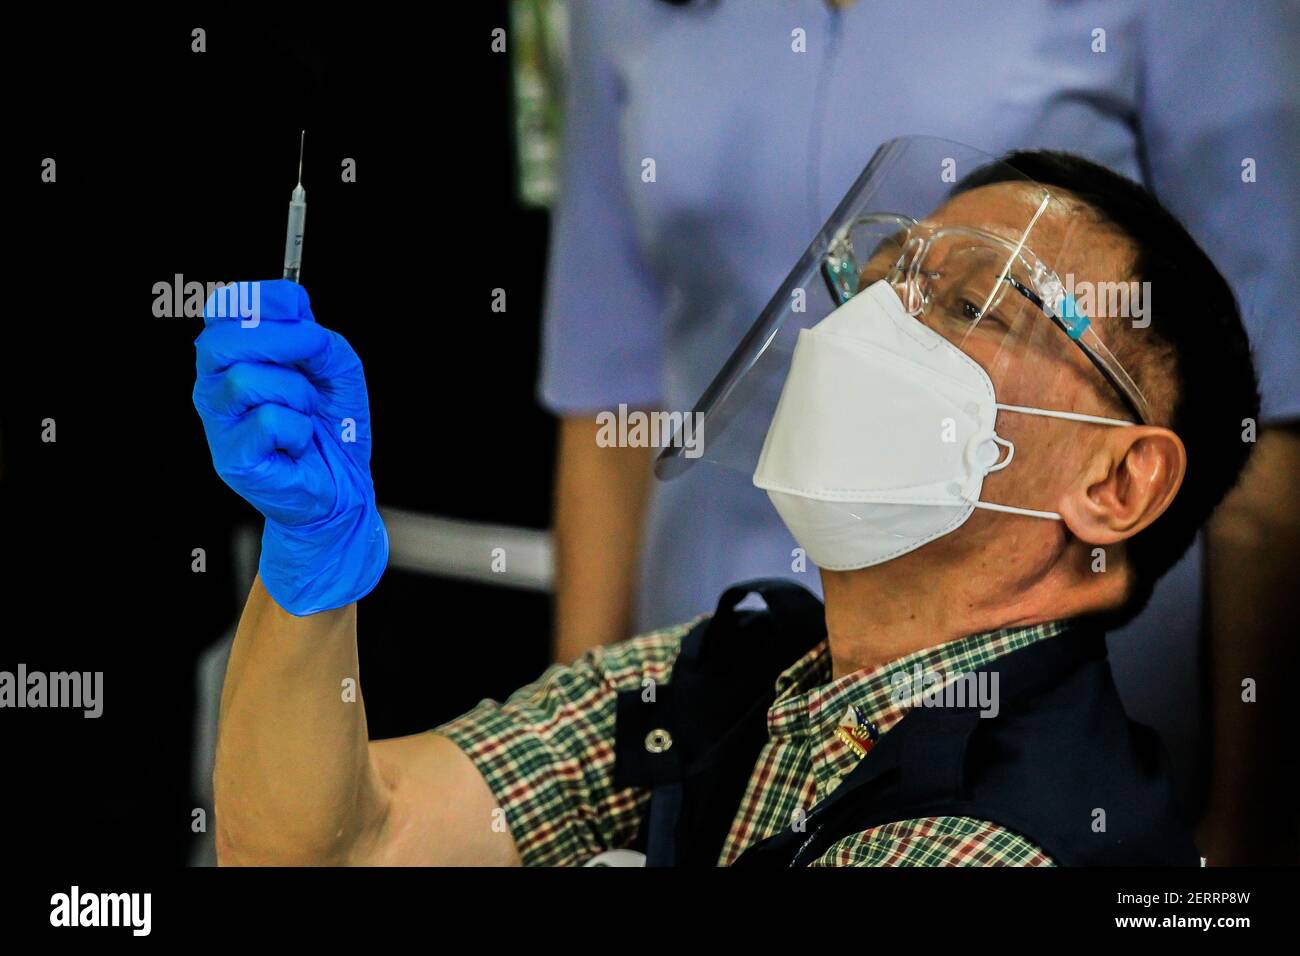 Manila. 1st Mar, 2021. Philippine Department of Health Secretary Francisco Duque III looks at a syringe containing a shot of COVID-19 vaccine from China's Sinovac on the first day of the vaccination at the Lung Center of the Philippines in Manila, the Philippines on March 1, 2021. The Philippines launched its coronavirus vaccination campaign on Monday, less than a day after the arrival of the Sinovac vaccine CoronaVac donated by China. Credit: Rouelle Umali/Xinhua/Alamy Live News Stock Photo